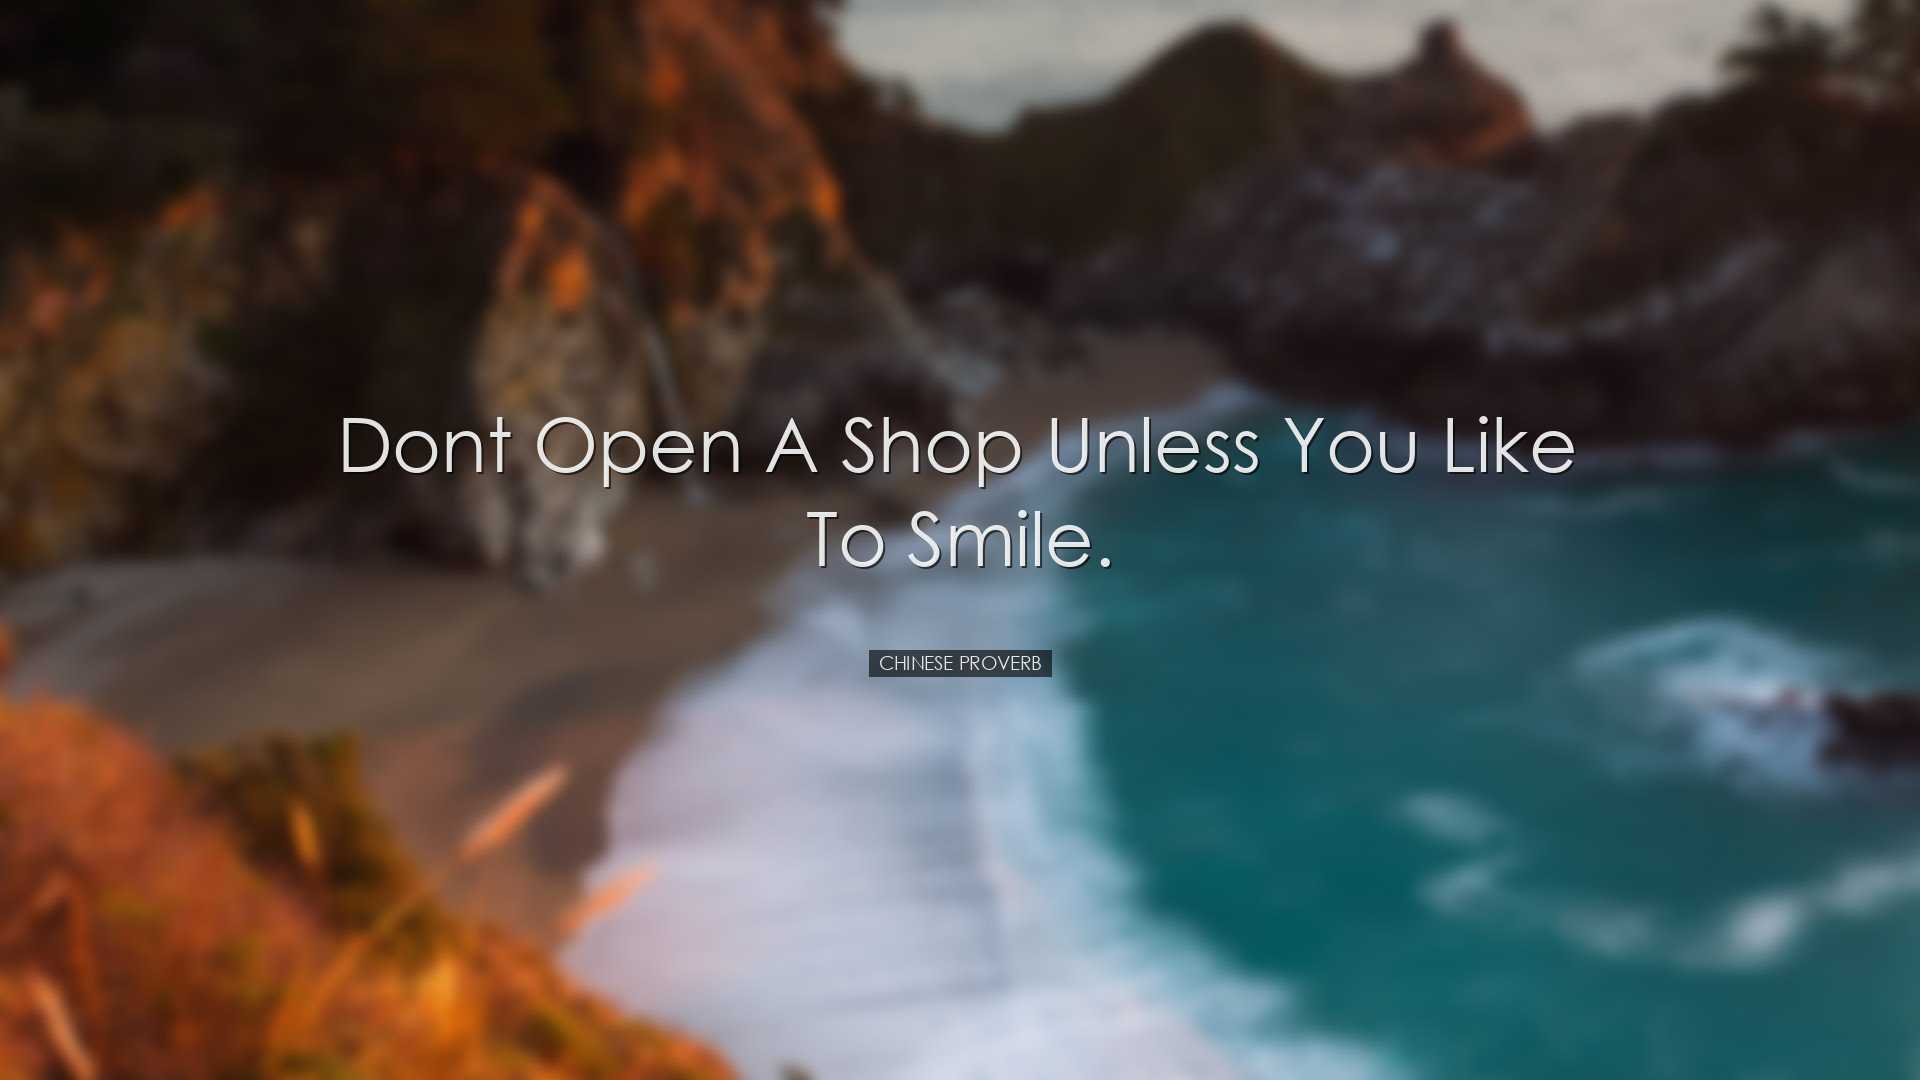 Dont open a shop unless you like to smile. - Chinese Proverb